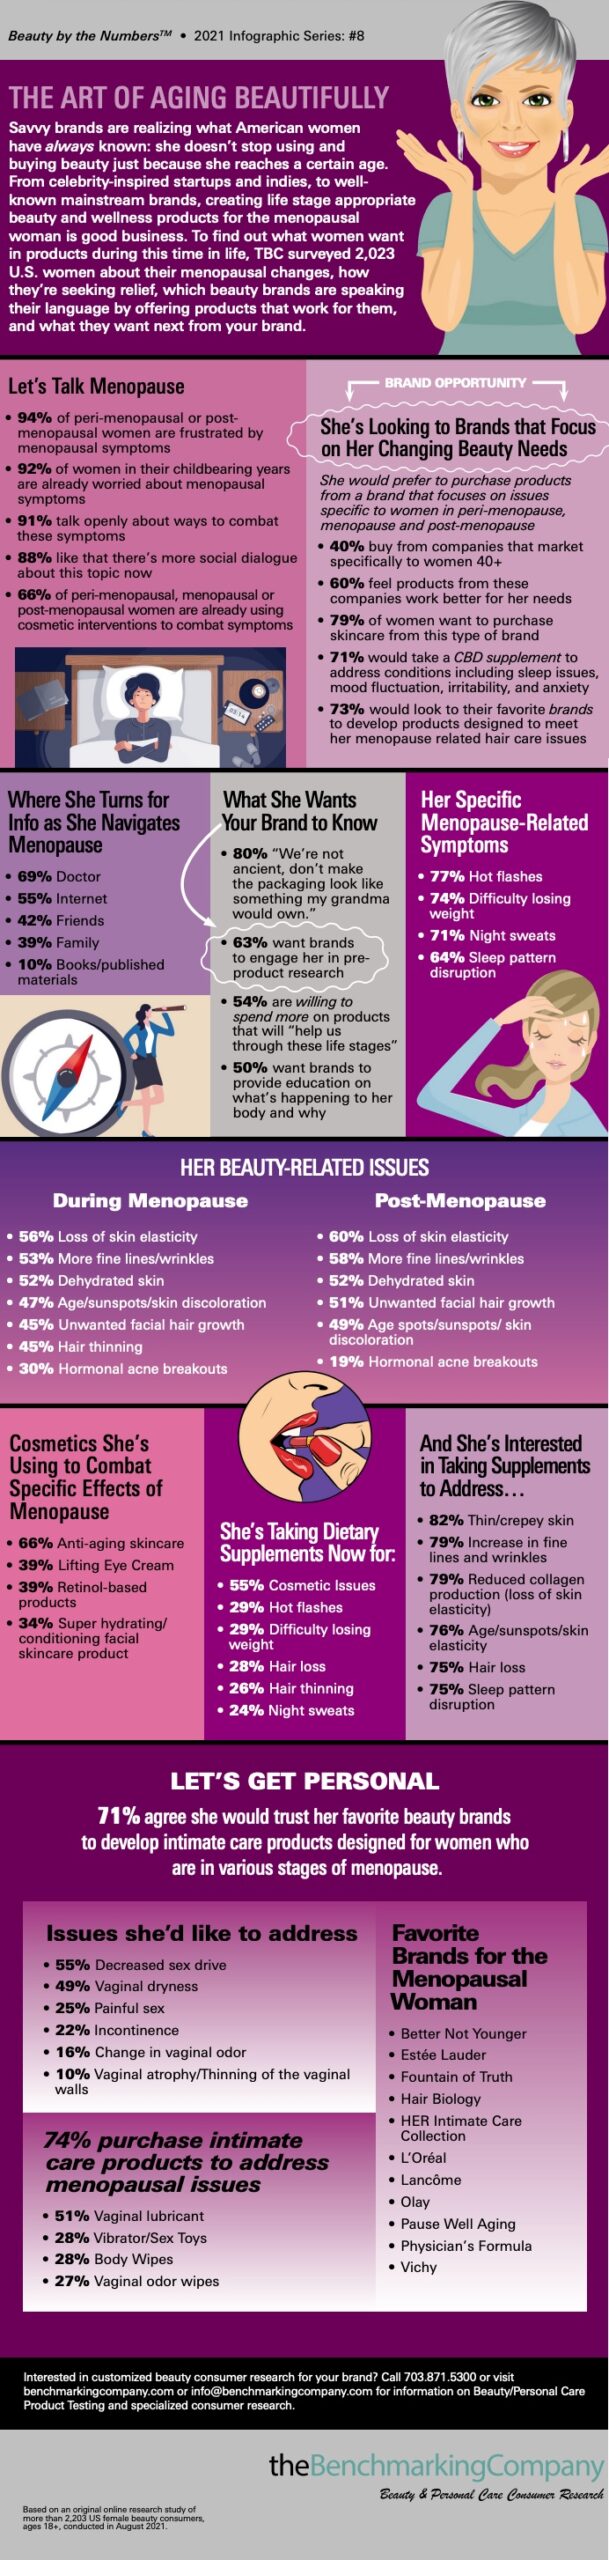 Menopause & Beauty: Infographic Series #8